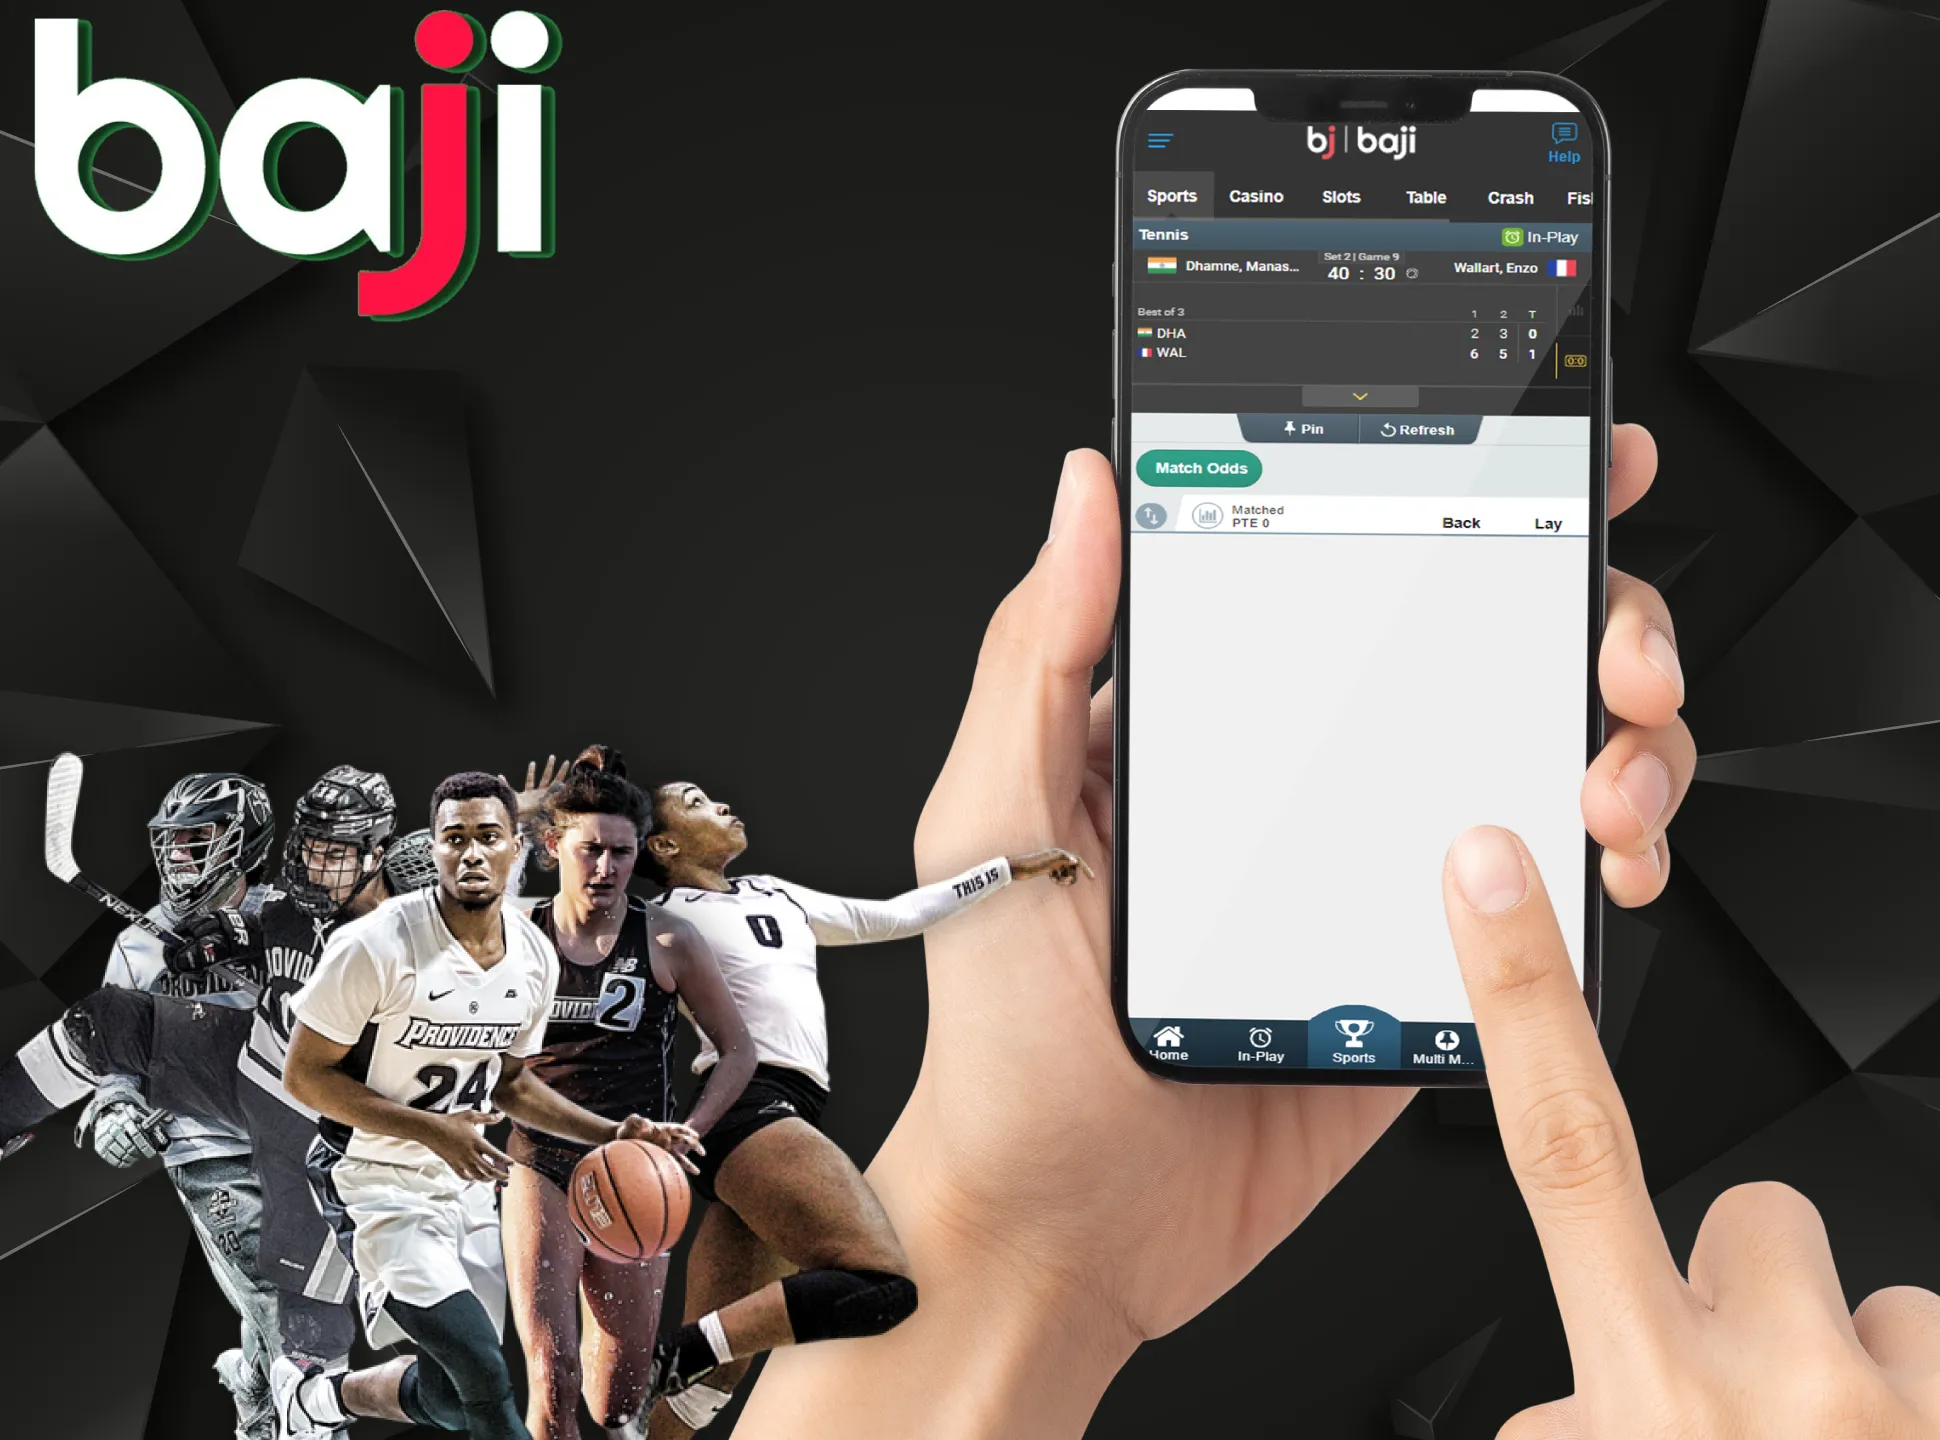 Bettors can place single, combo and system bets in the Baji mobile app.